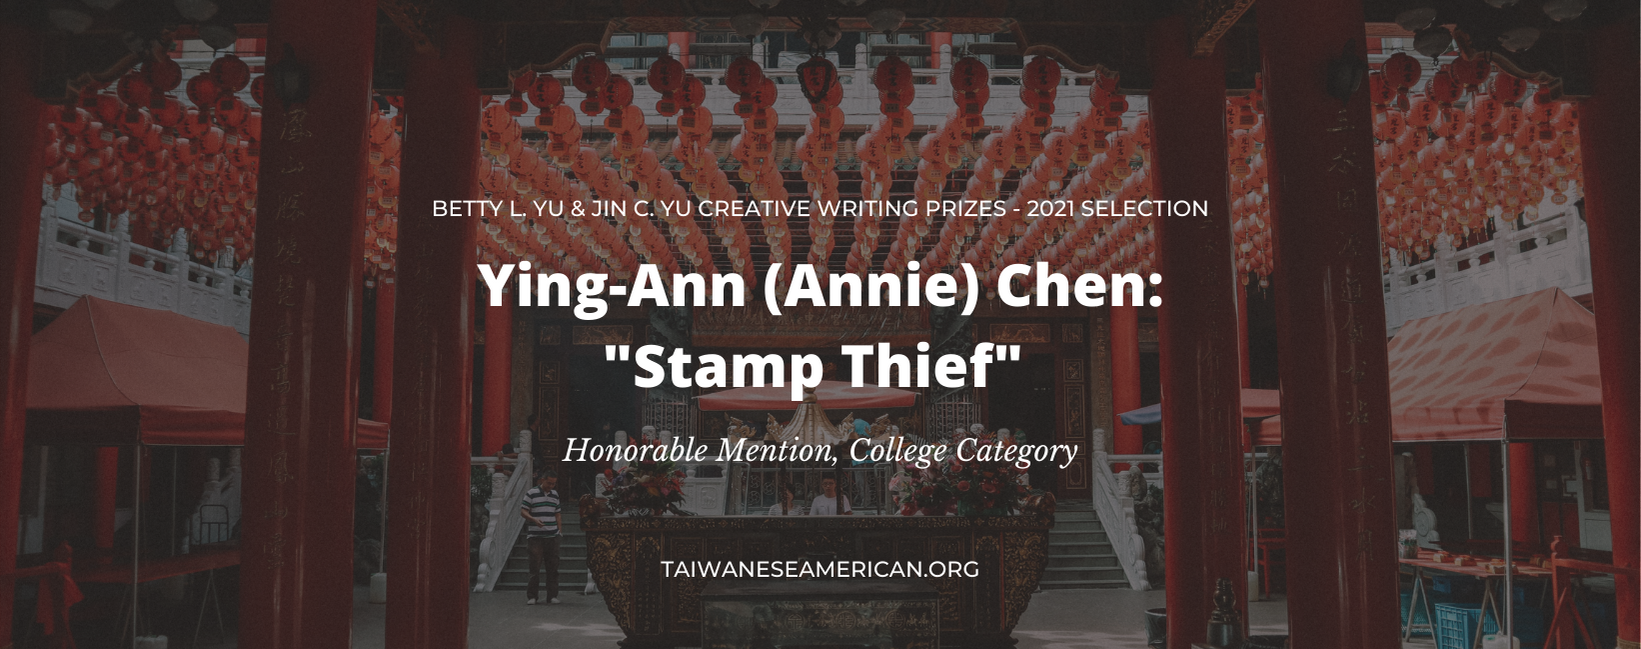 Annie latest news hu chen and 10 Things